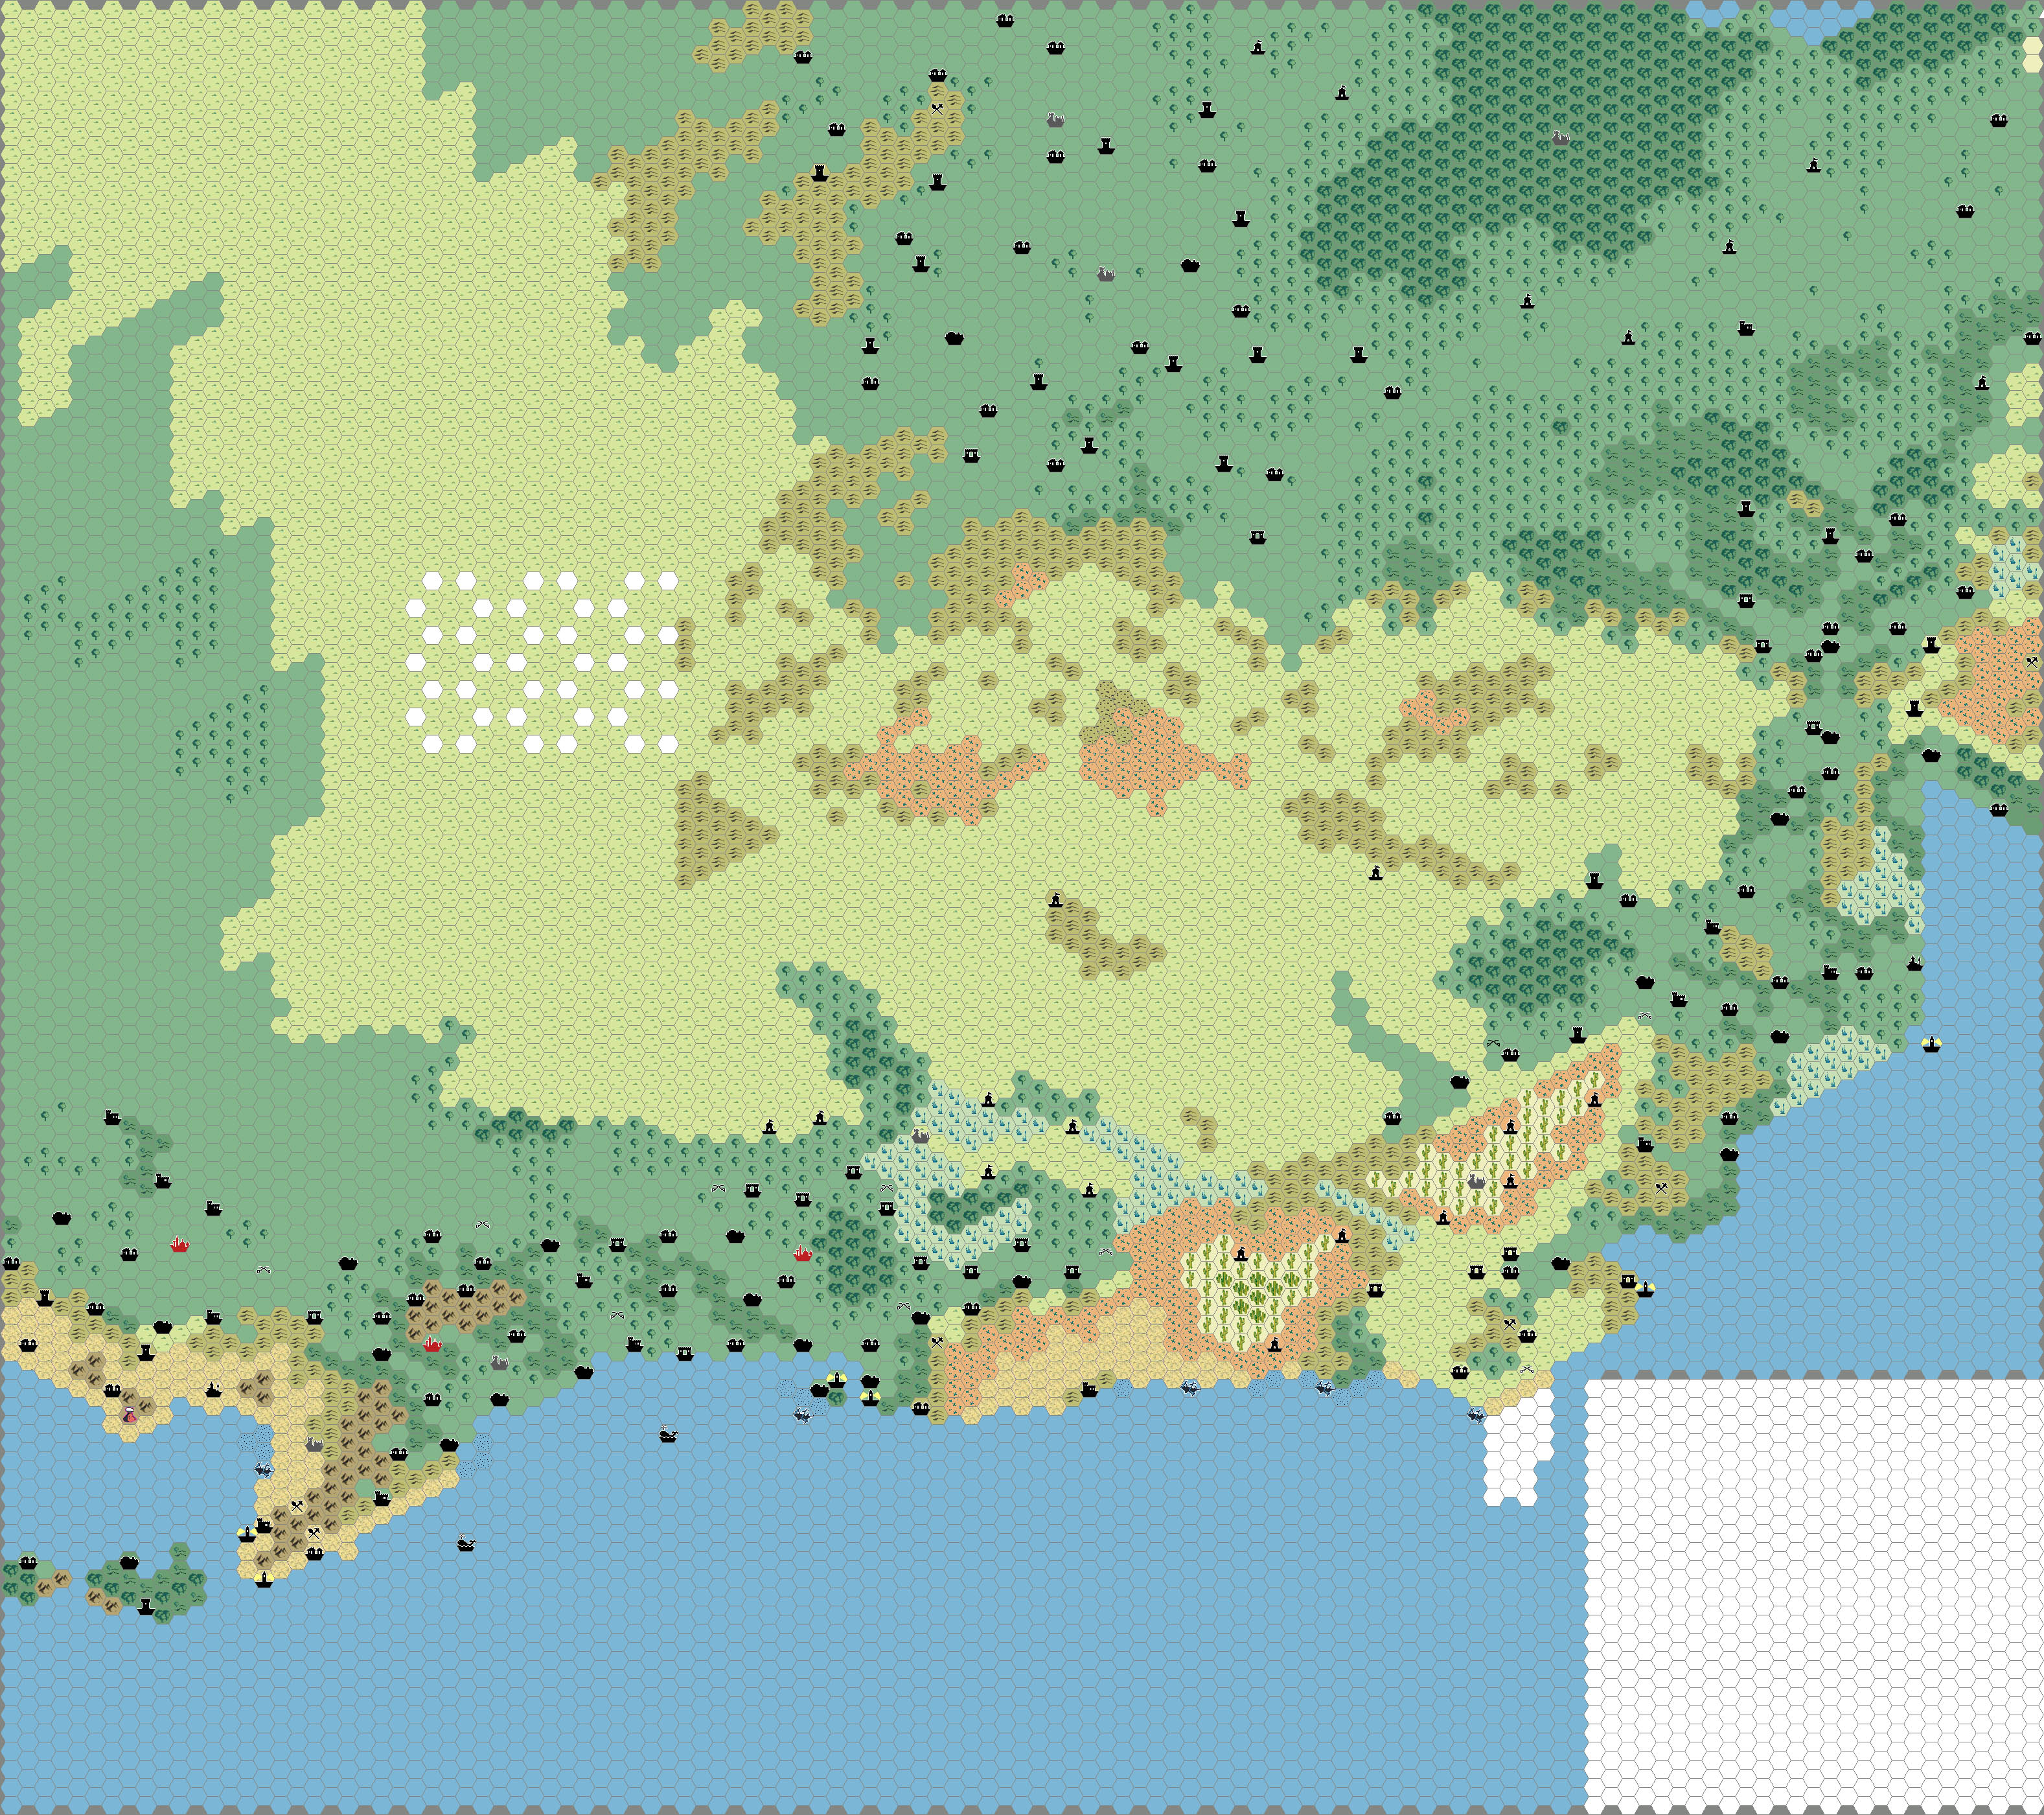 Work-in-progress map of the Eastern Savage Coast, 8 miles per hex by Thibault Sarlat, August 2005